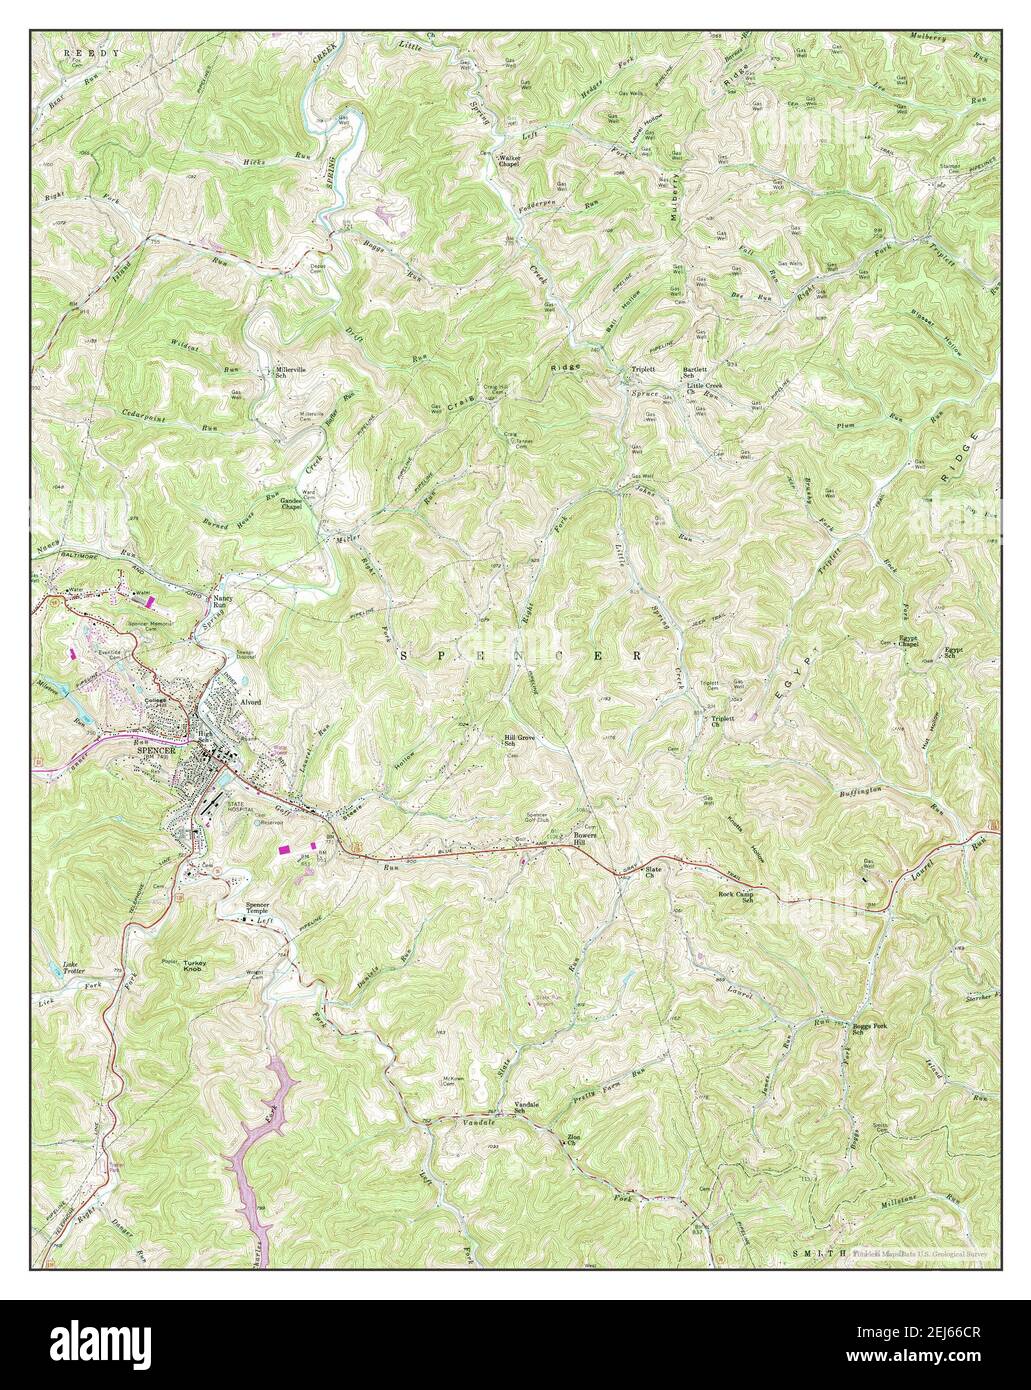 Spencer, West Virginia, map 1957, 1:24000, United States of America by Timeless Maps, data U.S. Geological Survey Stock Photo